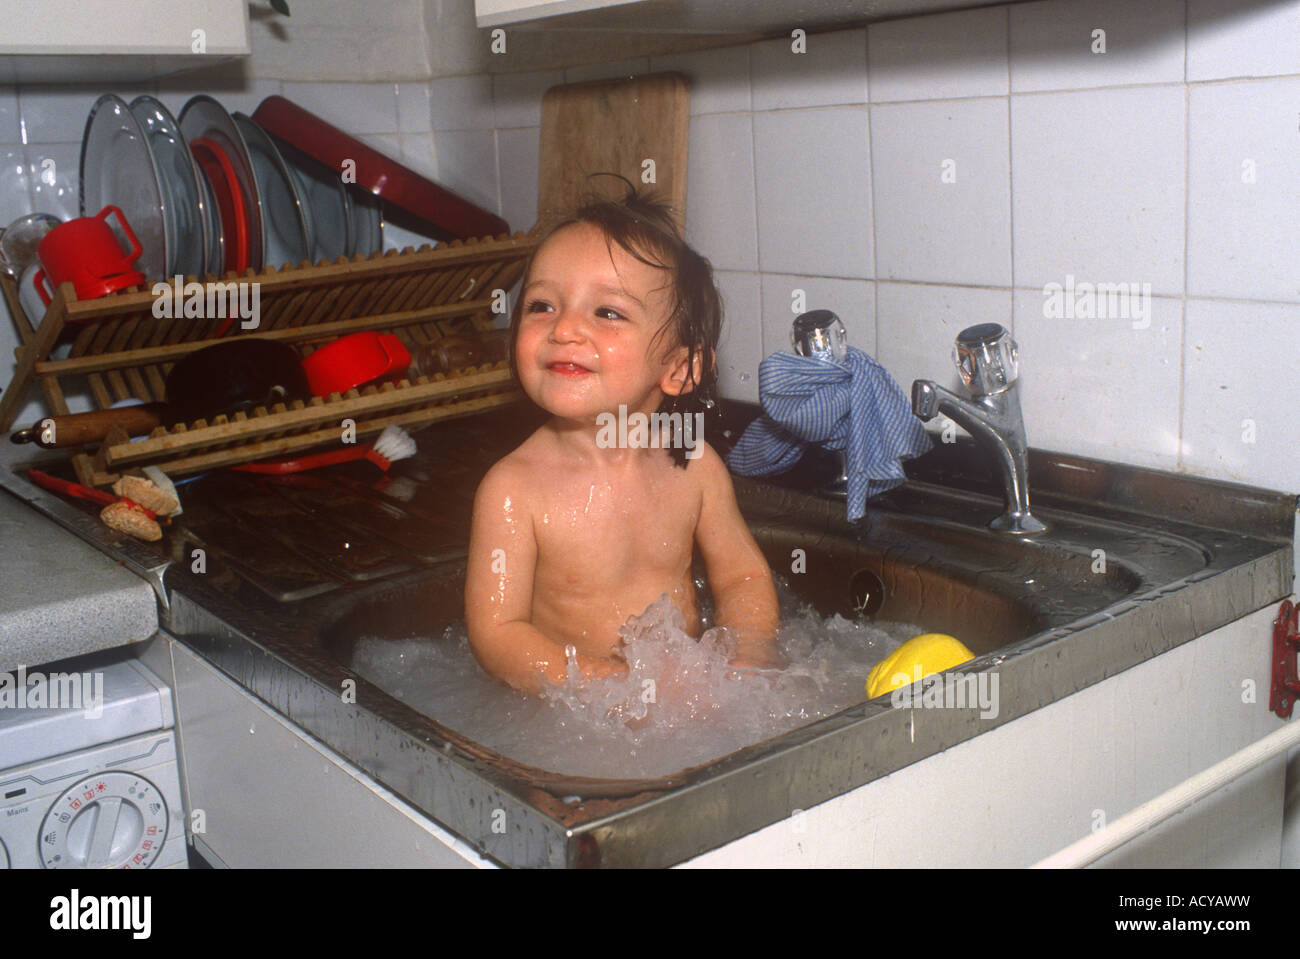 Baby Being Washed In Kitchen Sink Stock Photo 13253268 Alamy